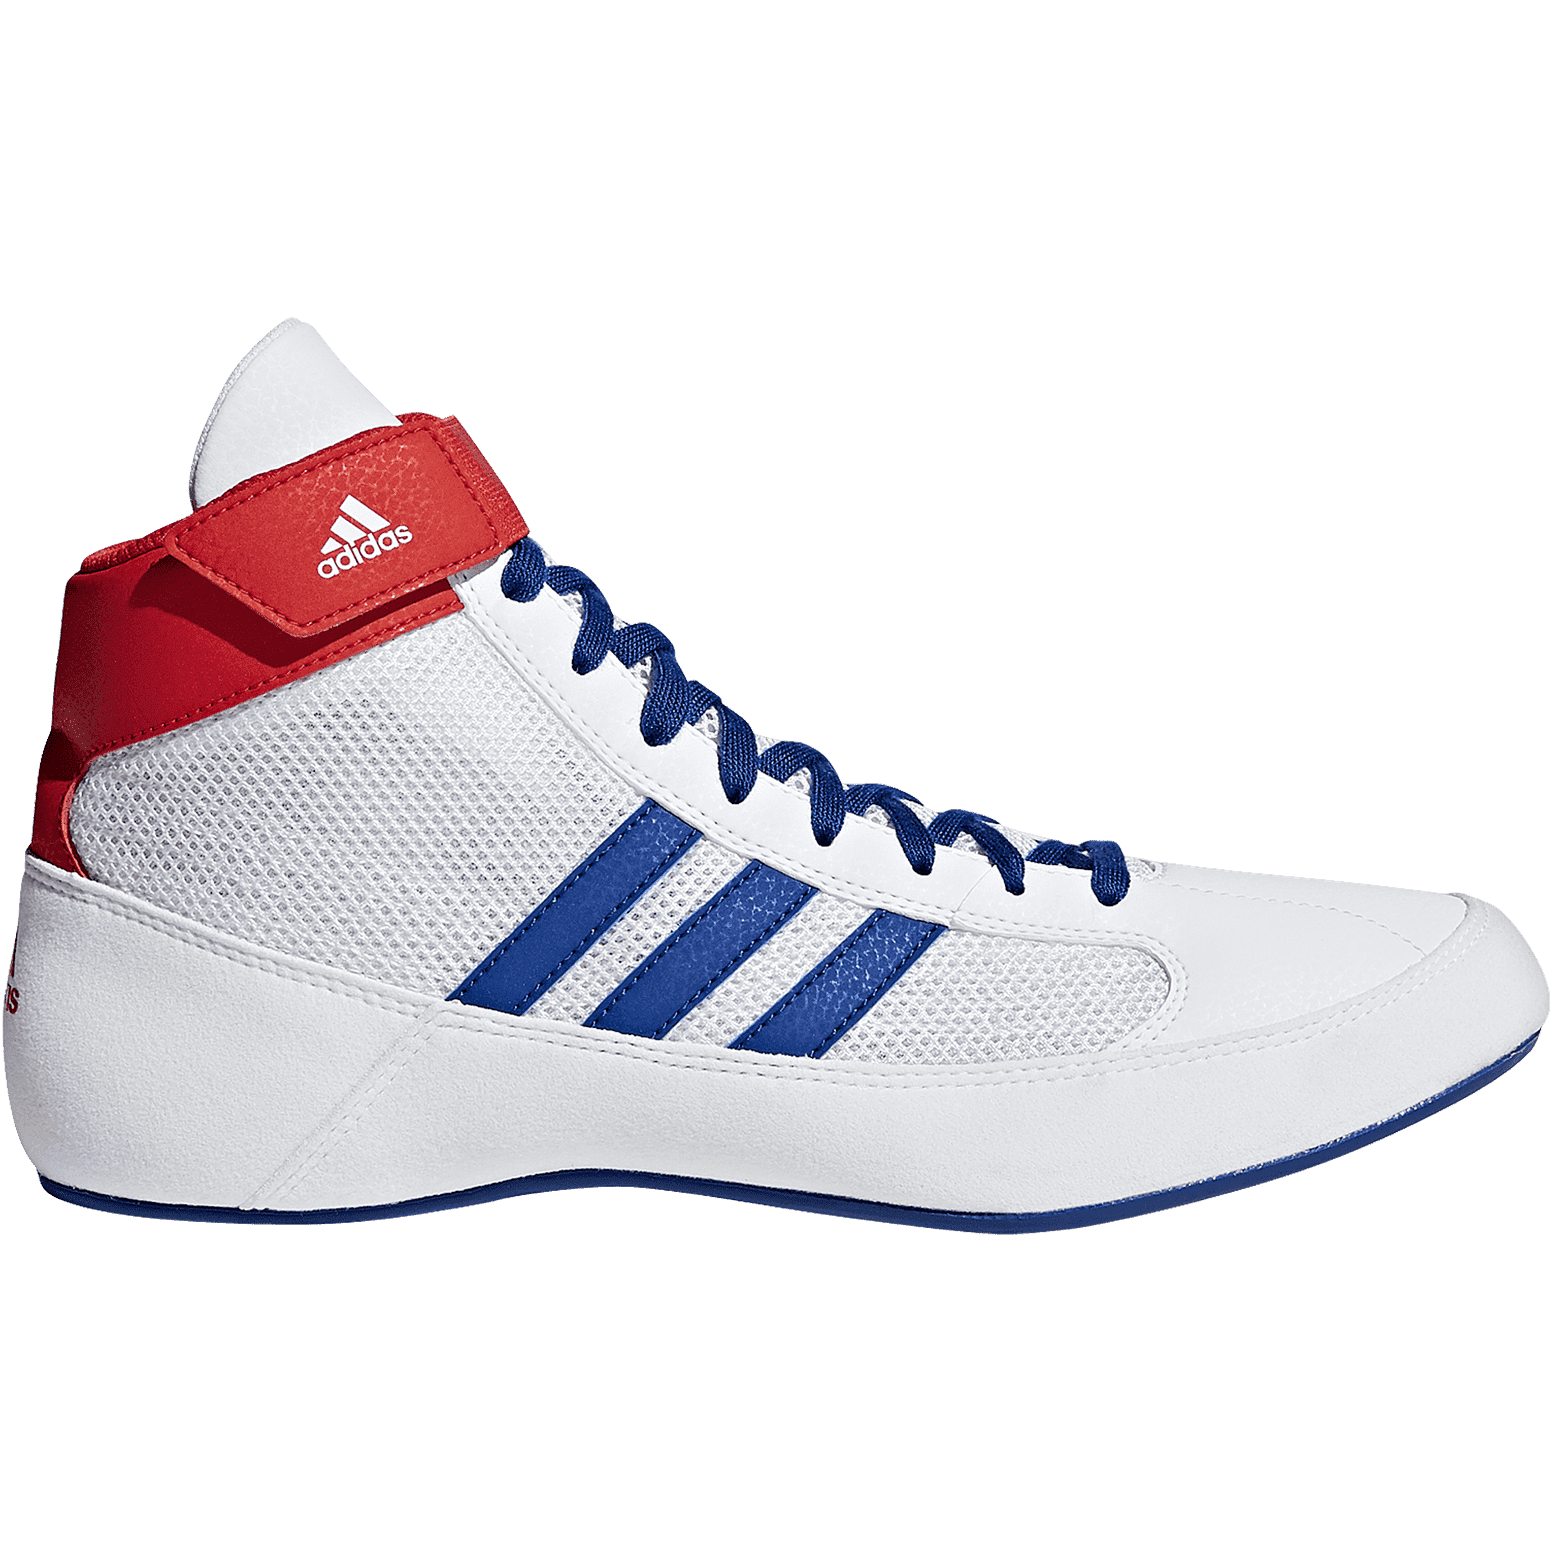 Adidas 221 HVC 2 Wrestling Shoes - White Red Royal